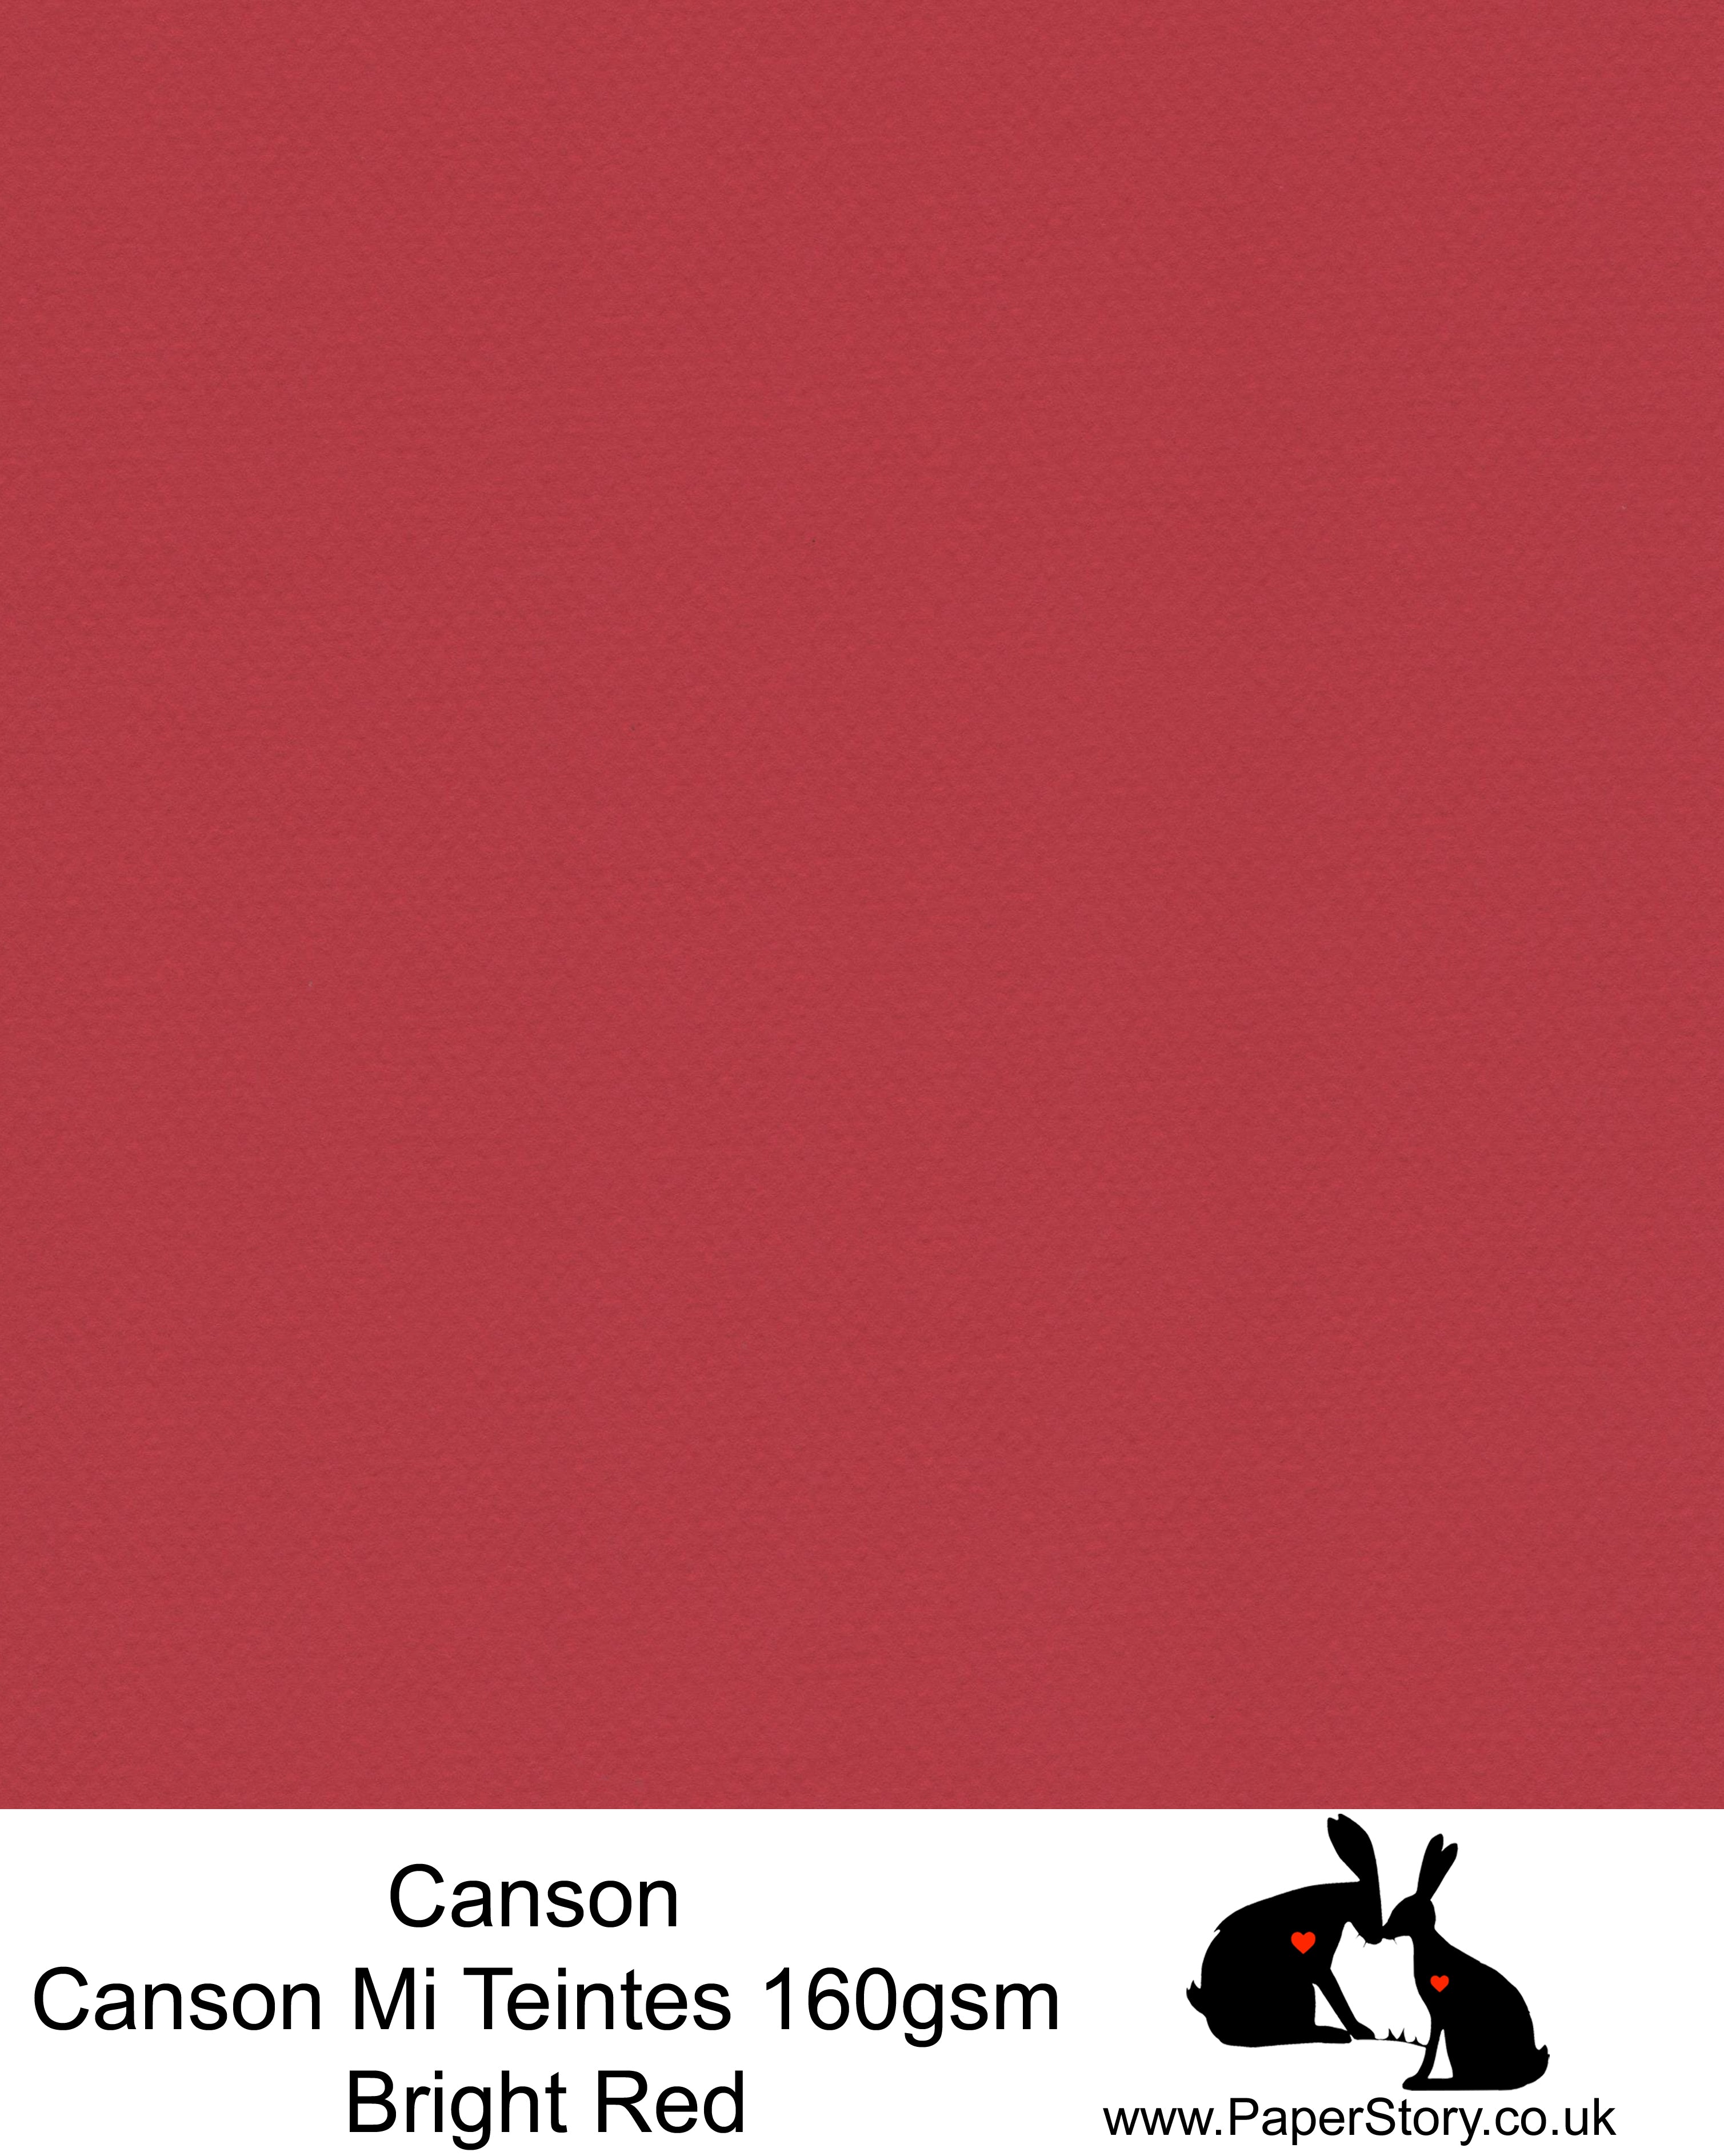 Canson Mi Teintes acid free, Bright red with a hint of Pink hammered texture honeycomb surface paper 160 gsm. This is a popular and classic paper for all artists especially well respected for Pastel  and Papercutting made famous by Paper Panda. This paper has a honeycombed finish one side and fine grain the other. An authentic art paper, acid free with a  very high 50% cotton content. Canson Mi-Teintes complies with the ISO 9706 standard on permanence, a guarantee of excellent conservation 